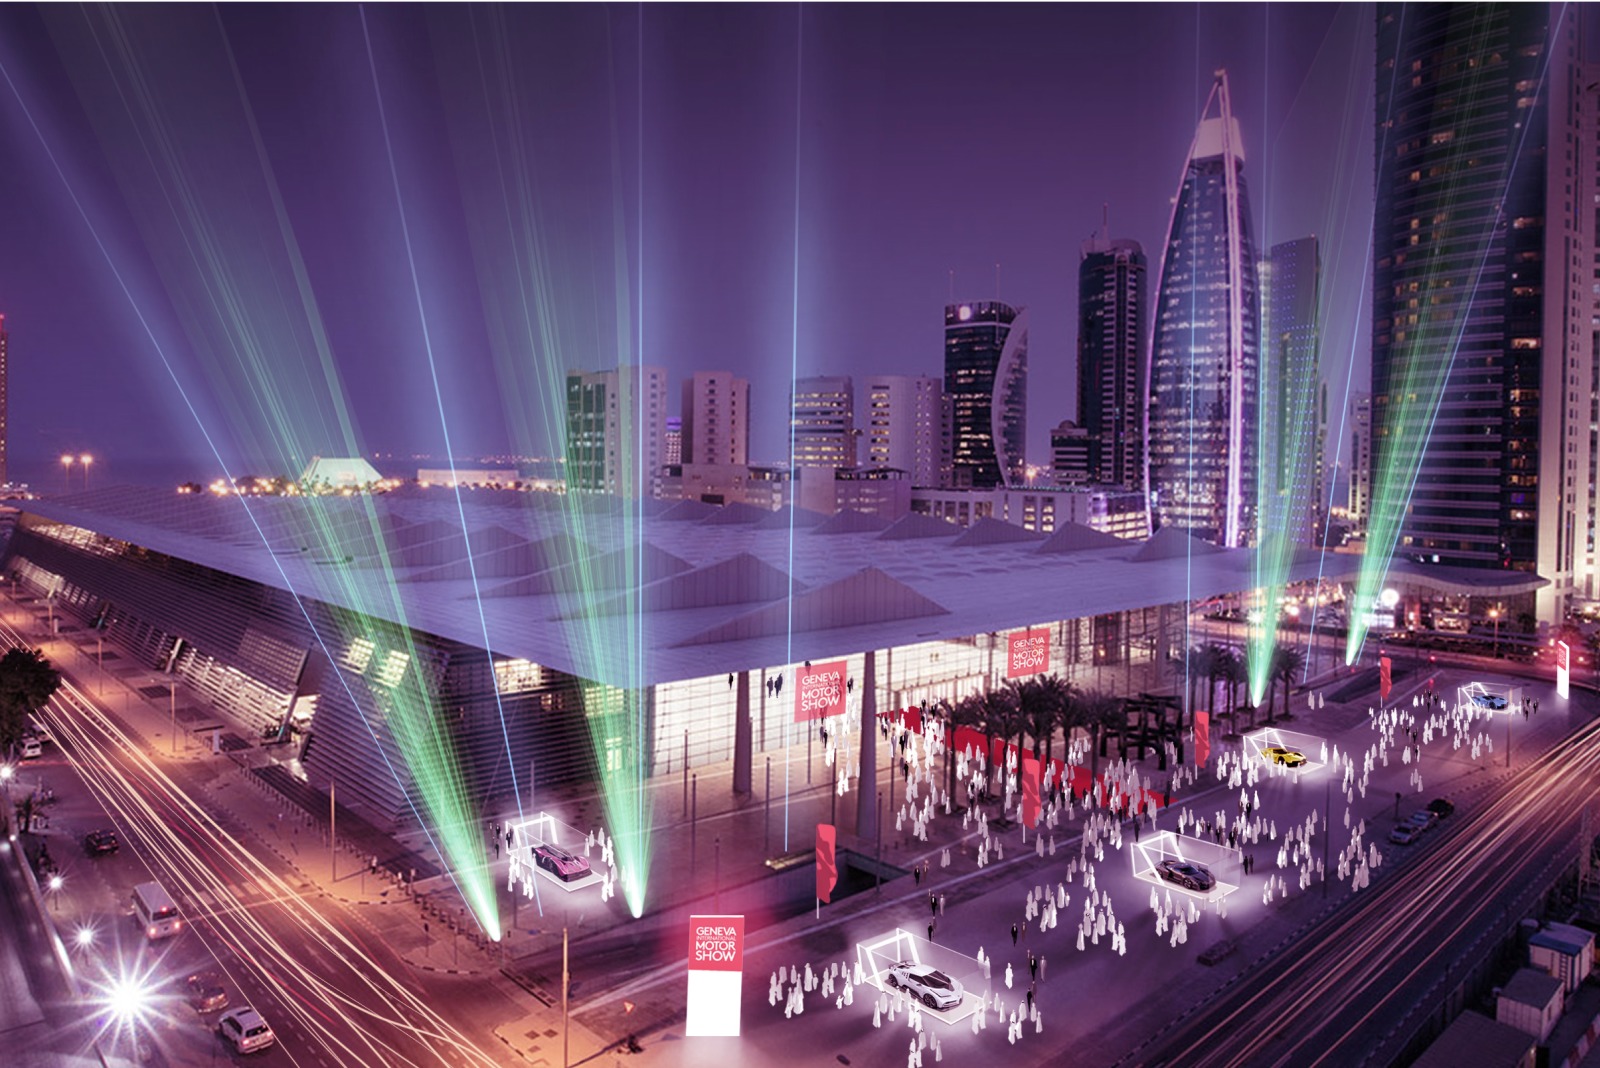 The Geneva International Motor Show Qatar is set to take place from 5